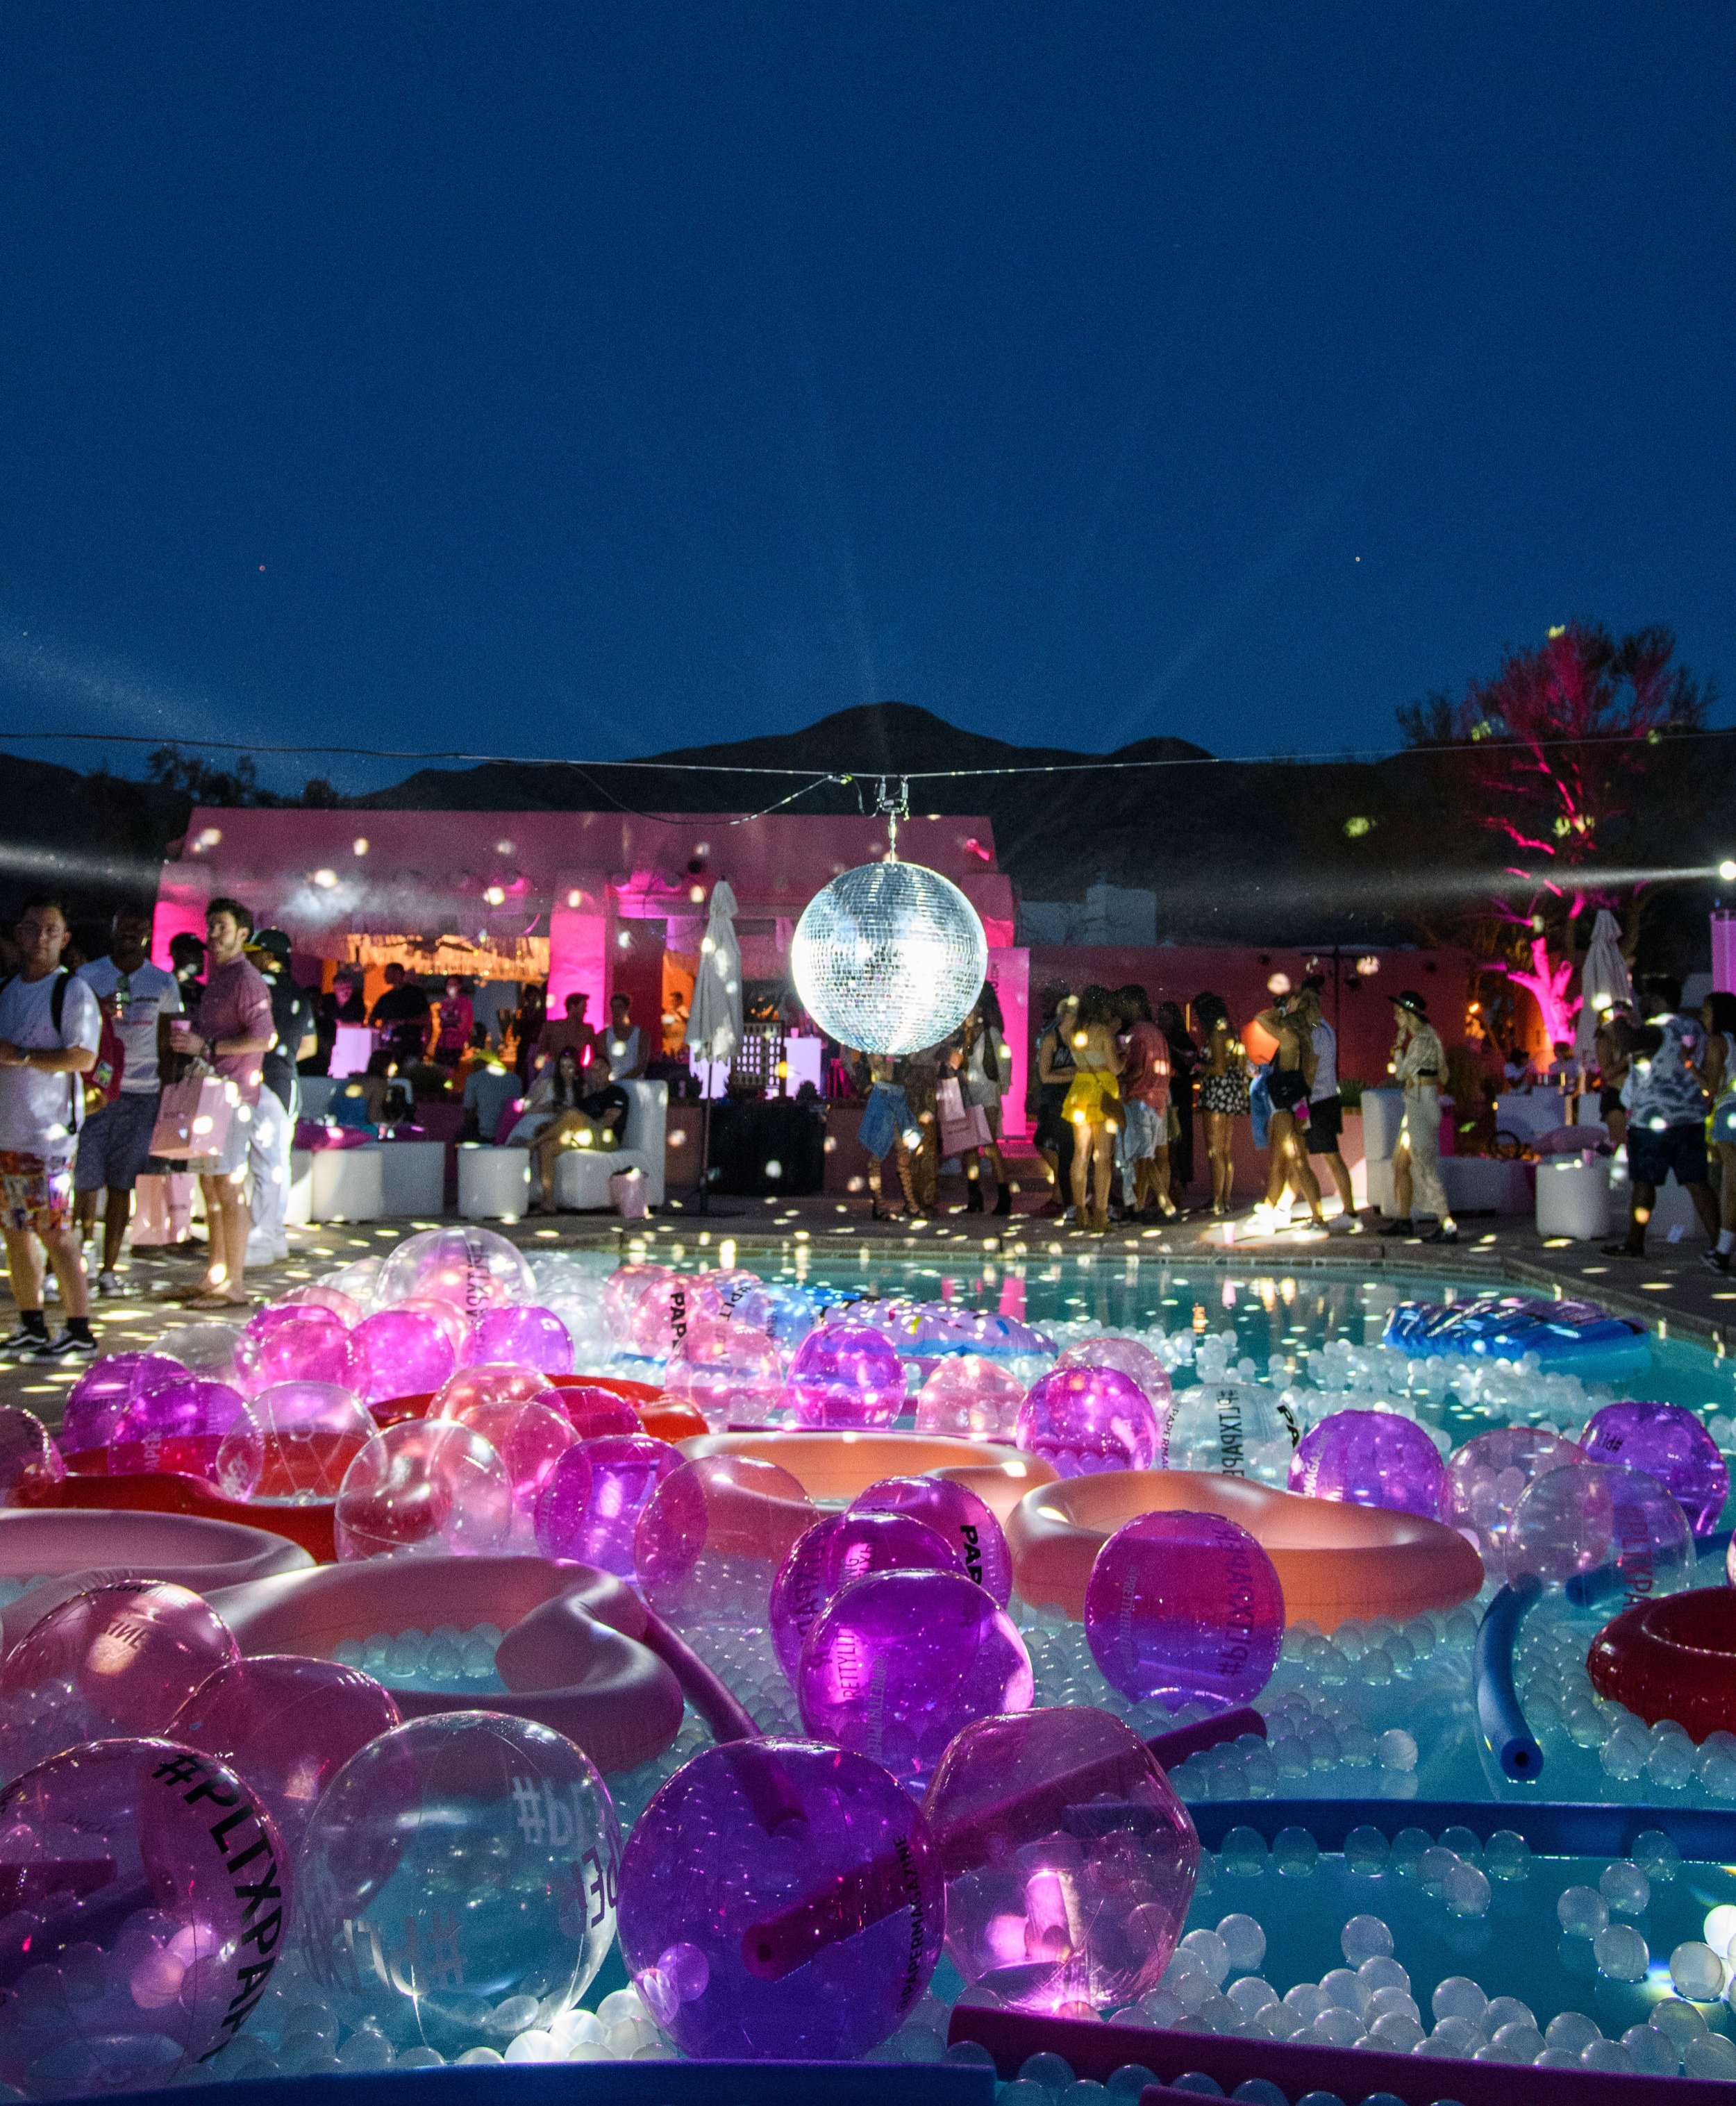 Ultimate Hollywood Coachella Poolside Party disco ball spins above the pool rays shine behind.jpg